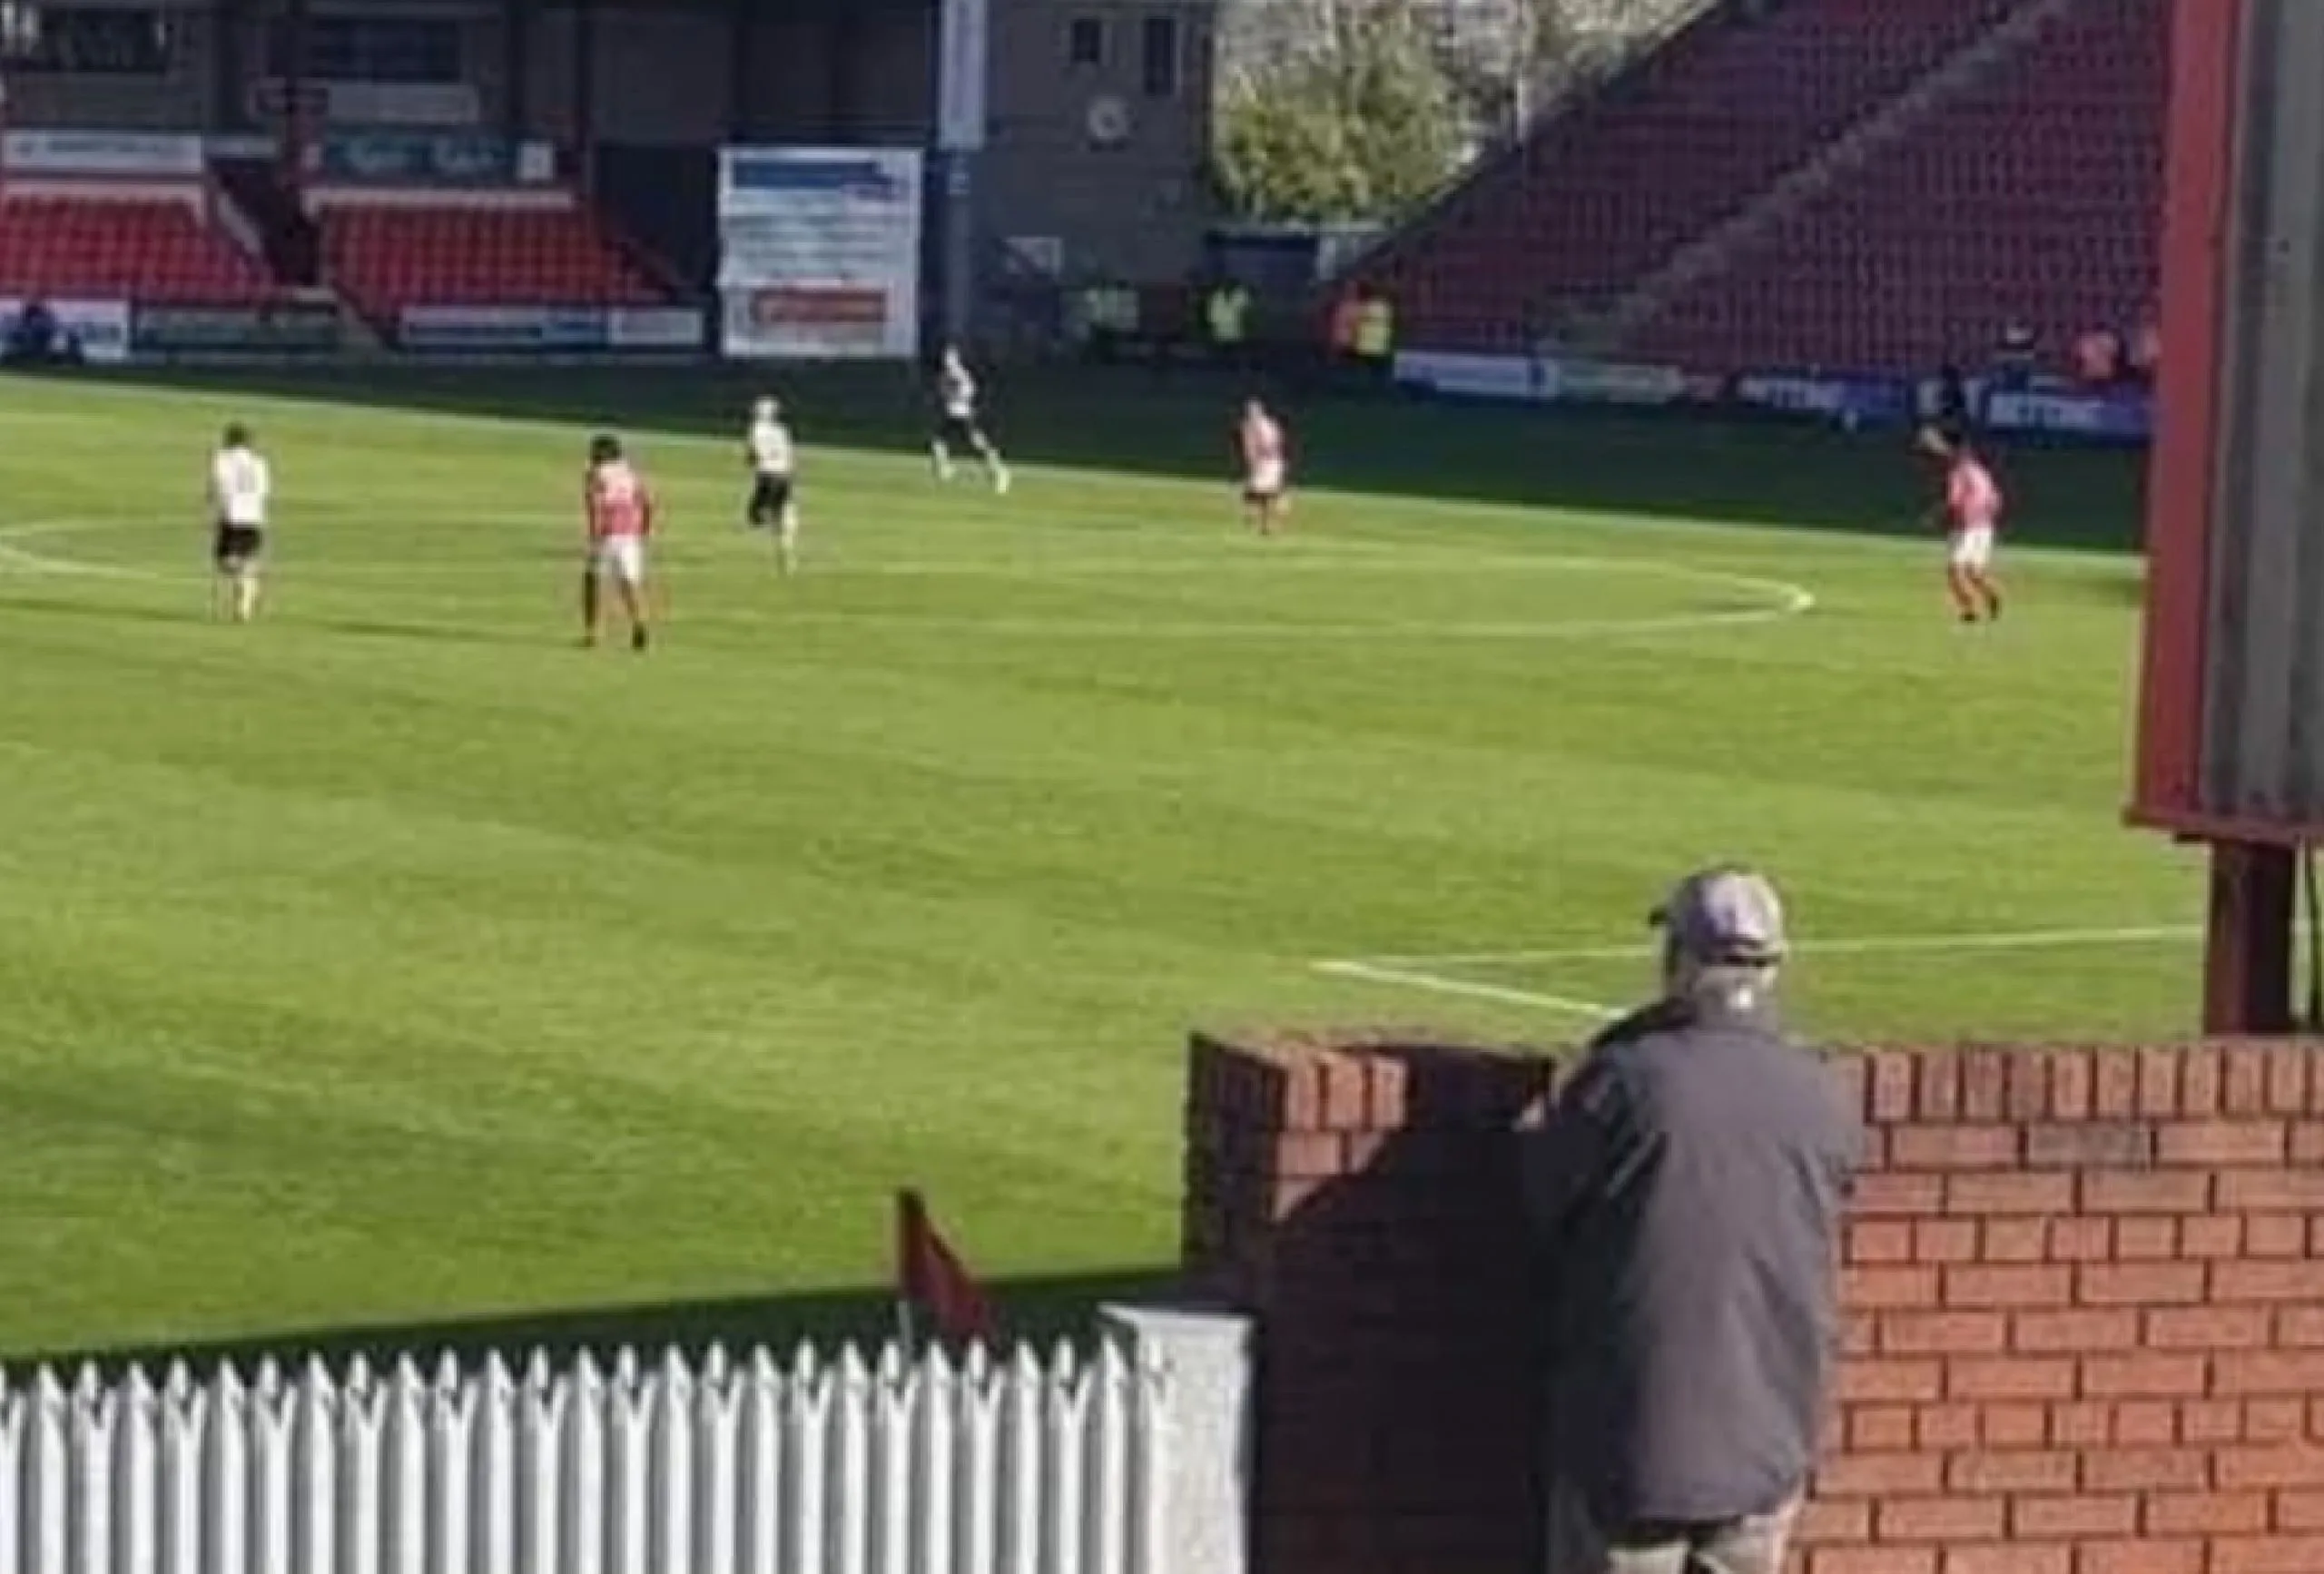 Crewe Alexandra fan watching their game against Charlton Athletic